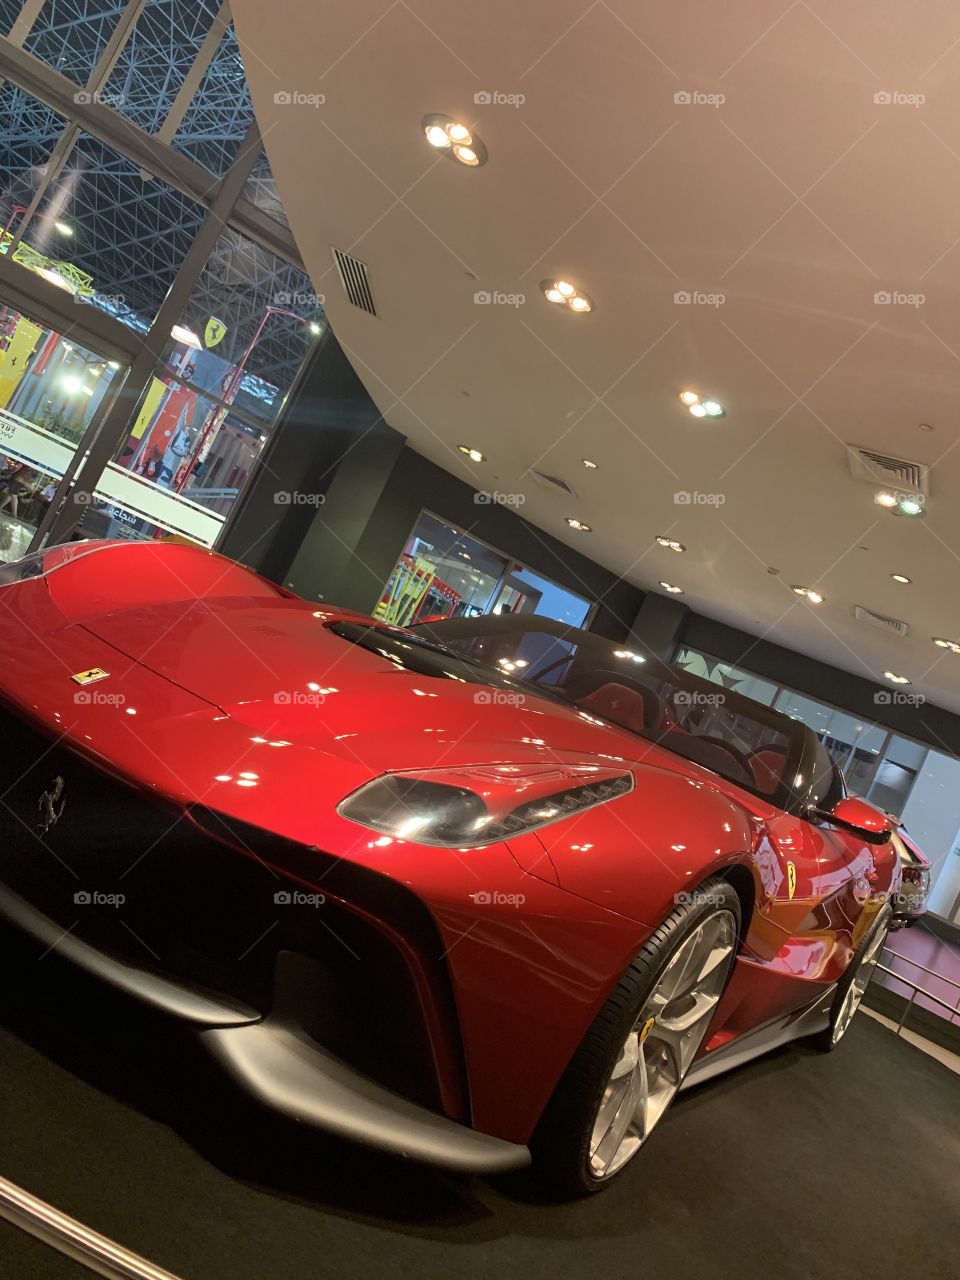 Ferrari park in Abu Dhabi let you touch a dream. Red, fast, dangerous and so wanted! 